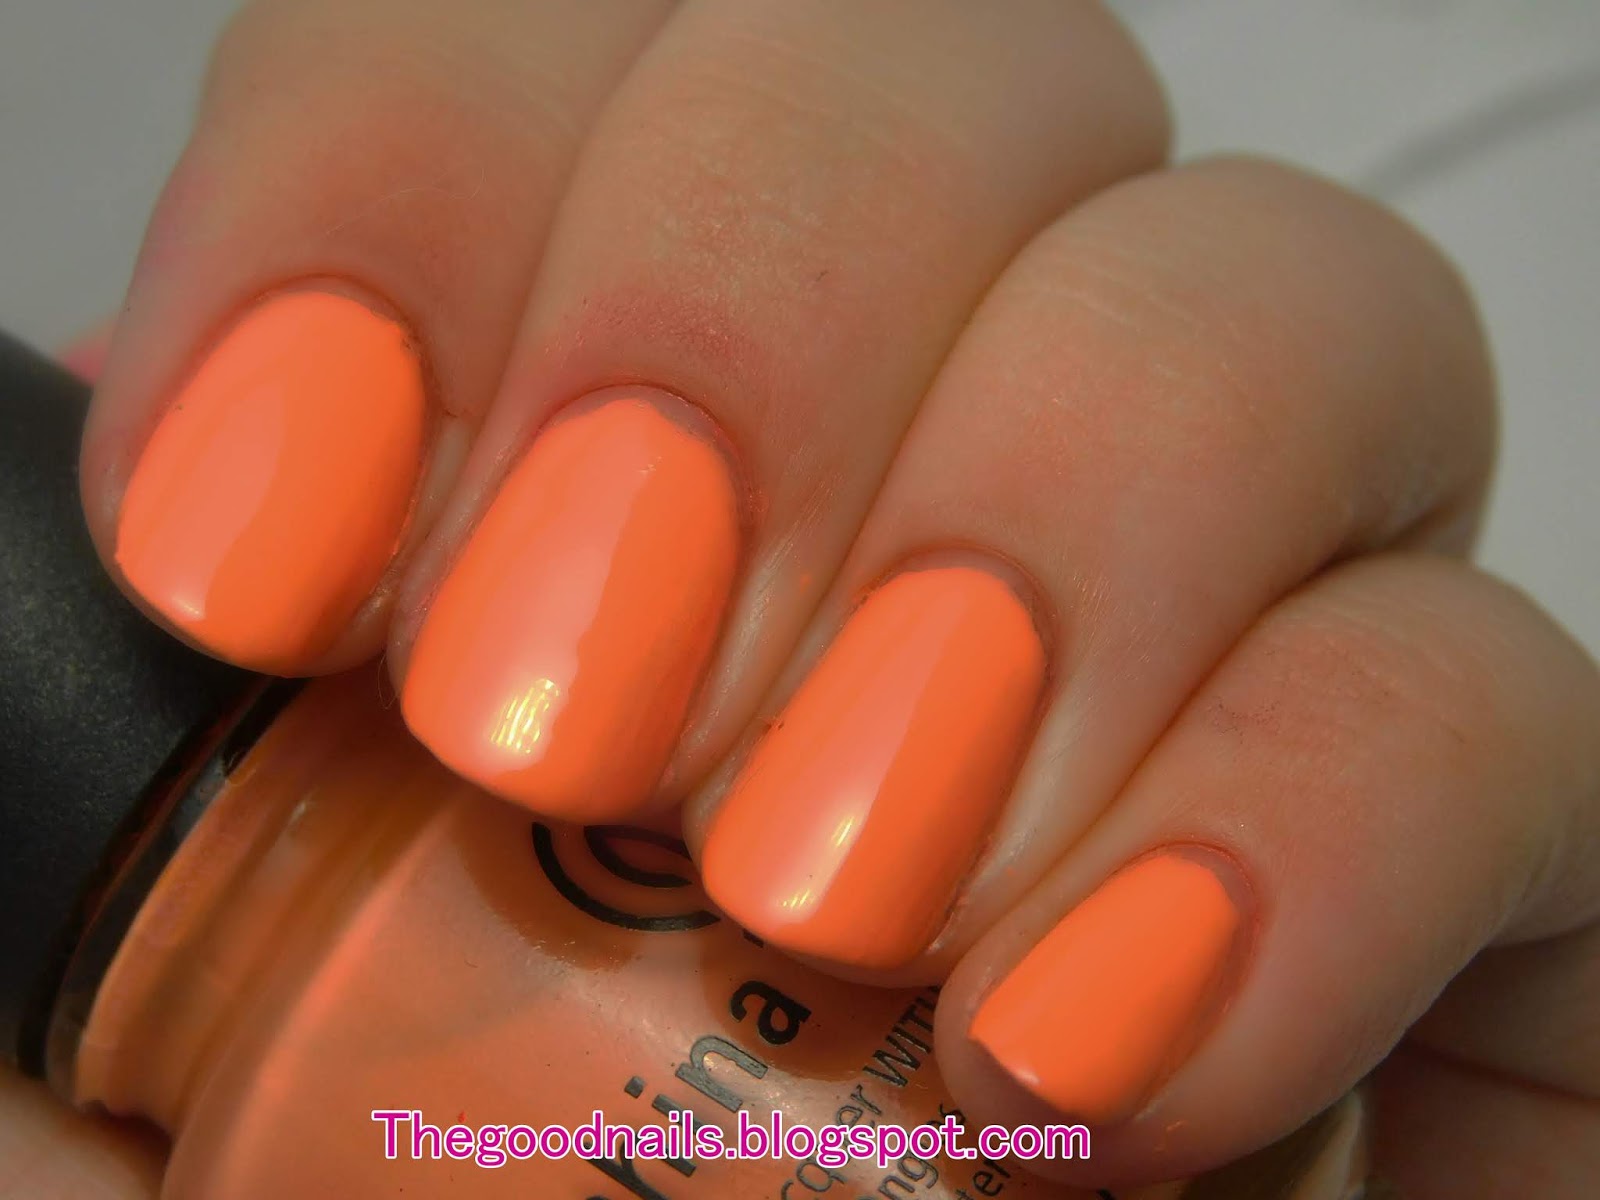 4. China Glaze Nail Lacquer in "Peachy Keen" - wide 1